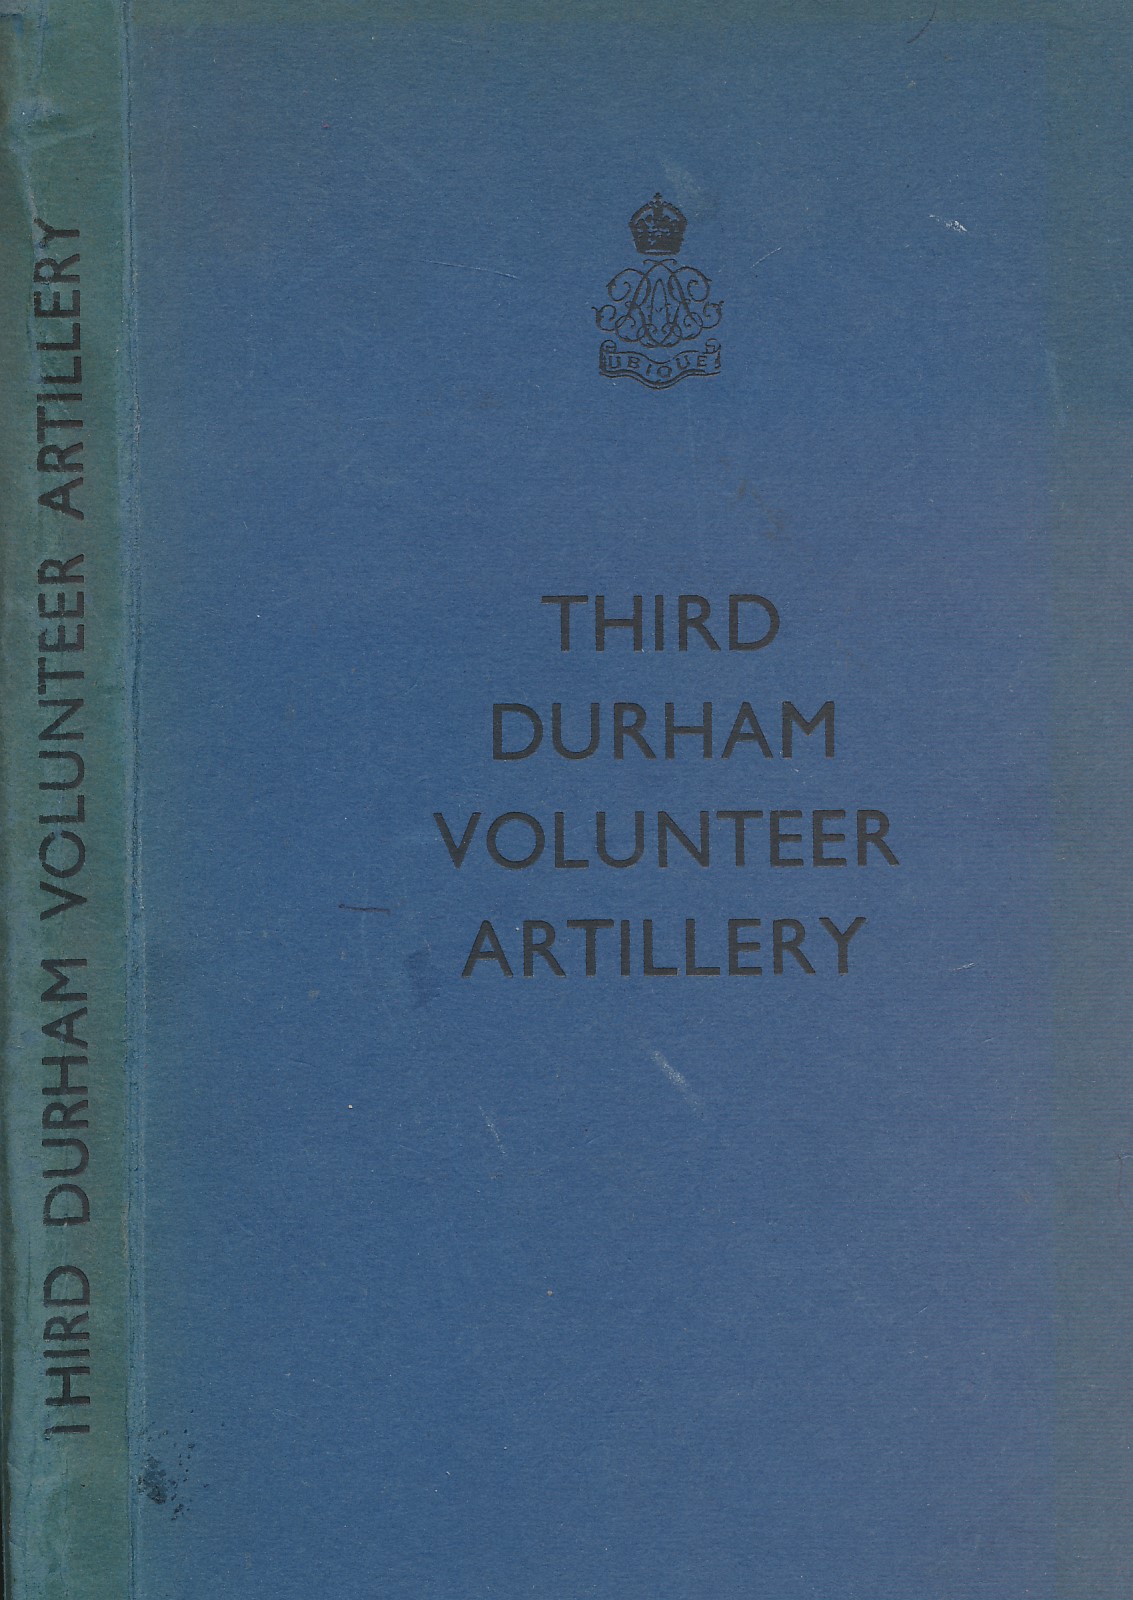 The History of the Third Durham Volunteer Artillery now Part of the 274th (Northumbrian) Field Regiment, R.A. (T.A.) 1860 - 1960